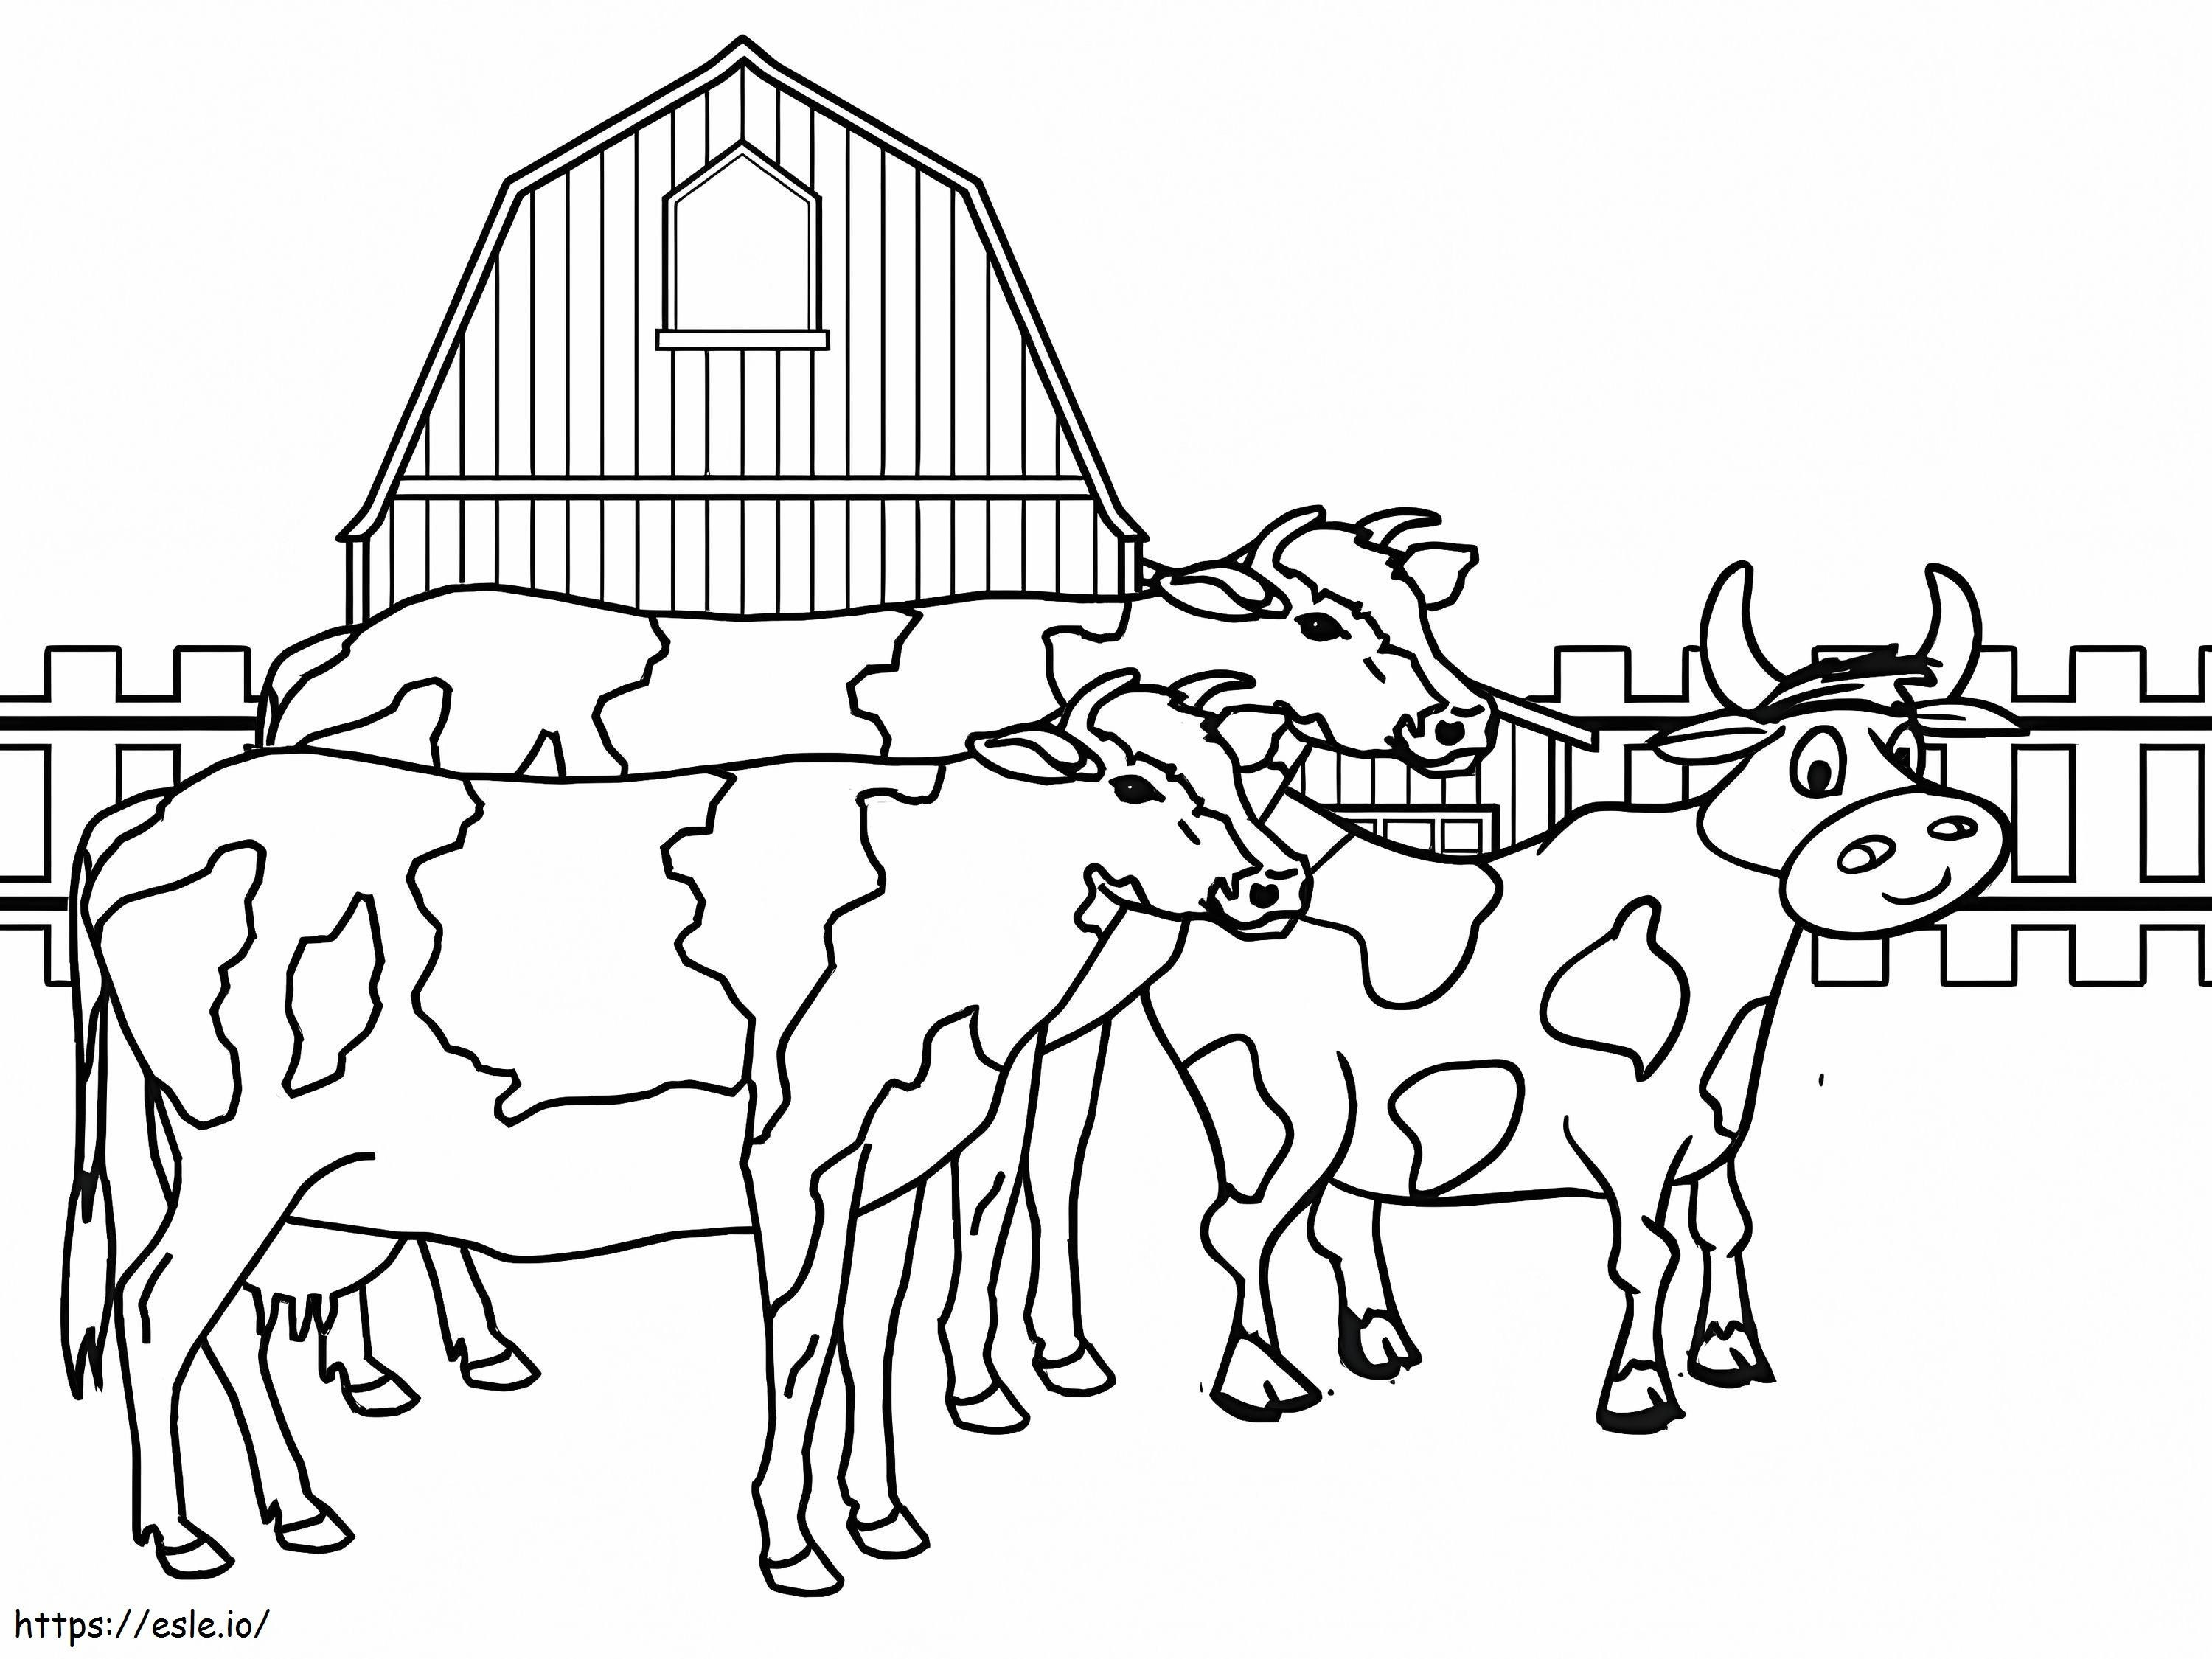 Cow Corral coloring page